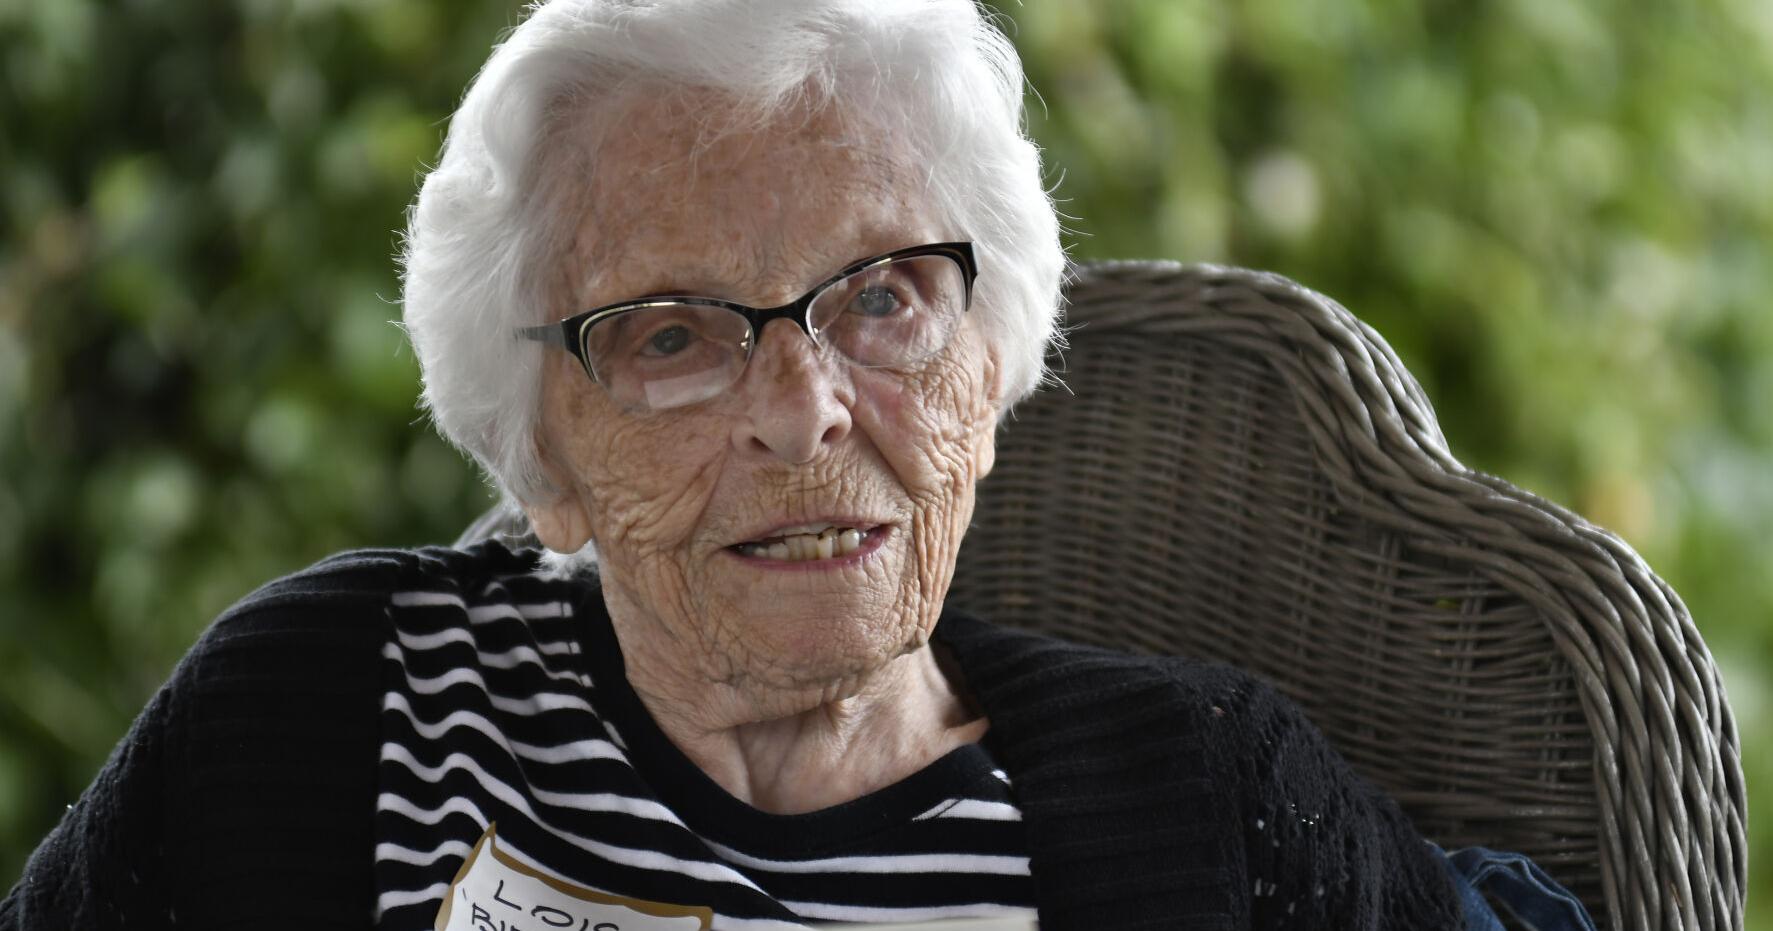 WATCH NOW: Lois McDonald celebrates 100th birthday surrounded by friends and family